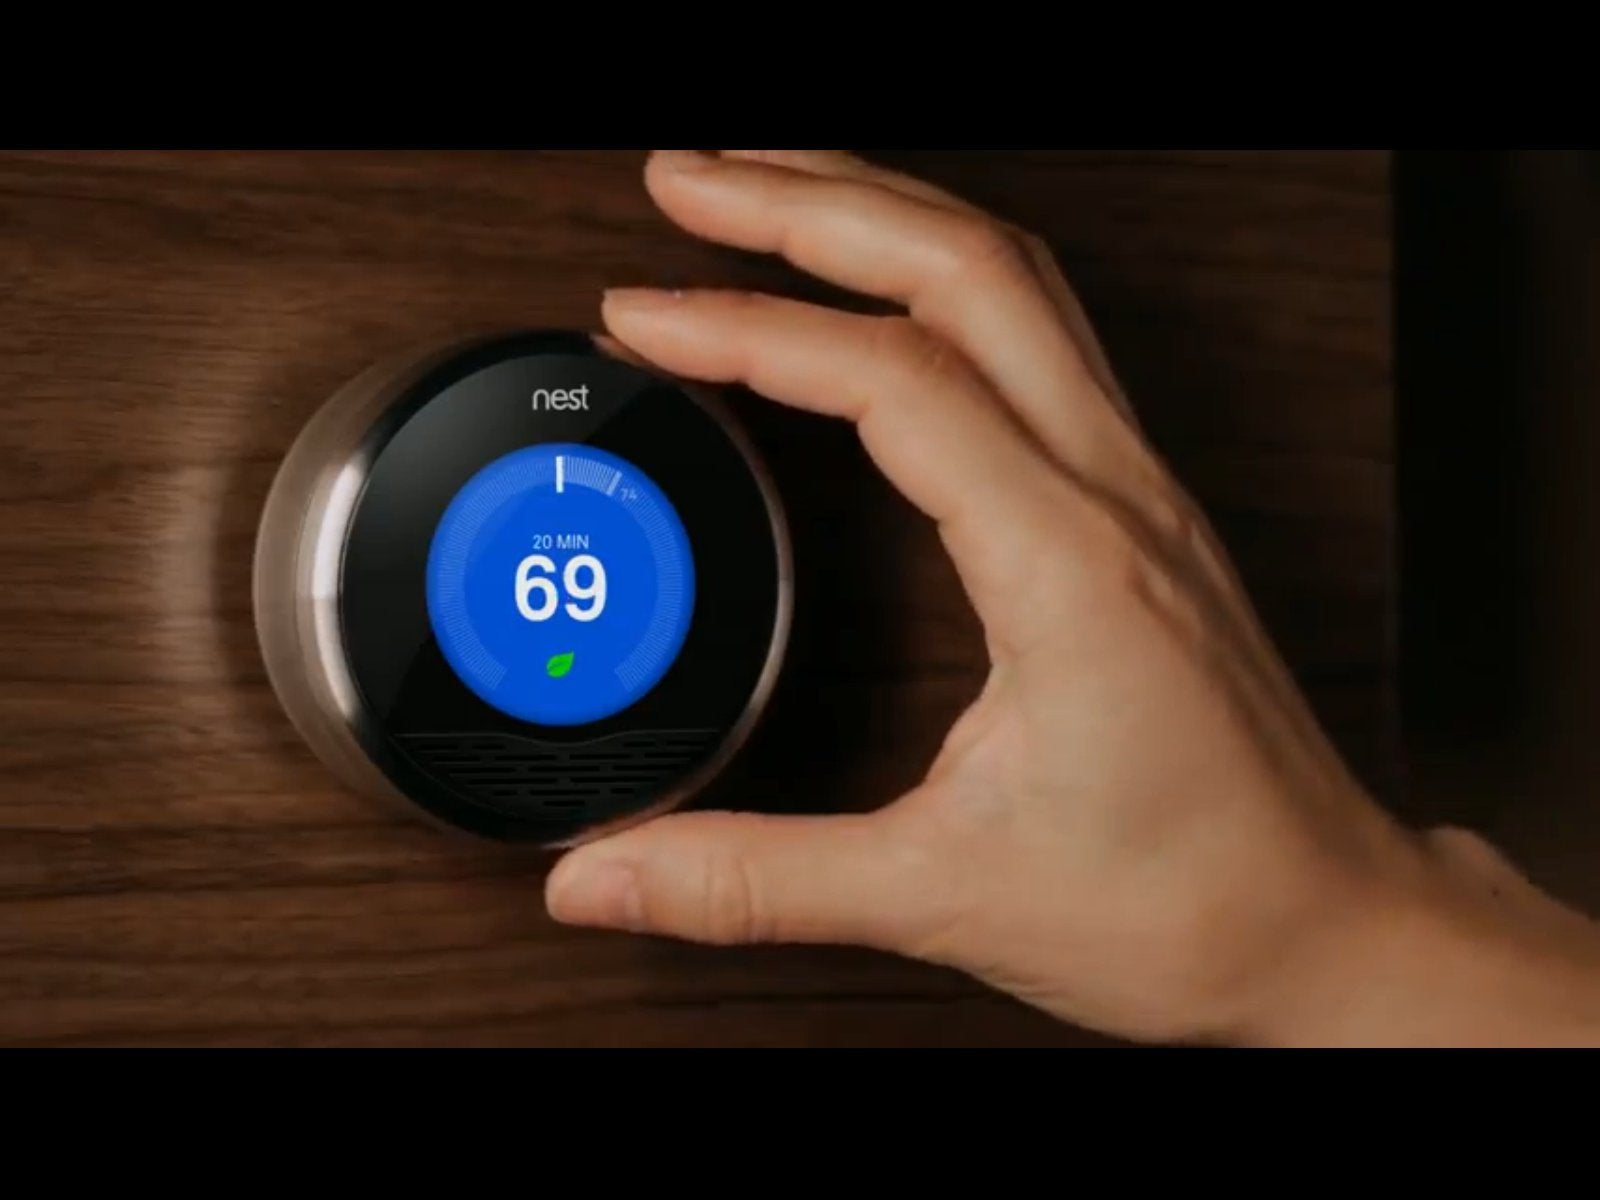 Nest Lab's eponymous thermostat has been a key device in advancing the 'internet of things'.